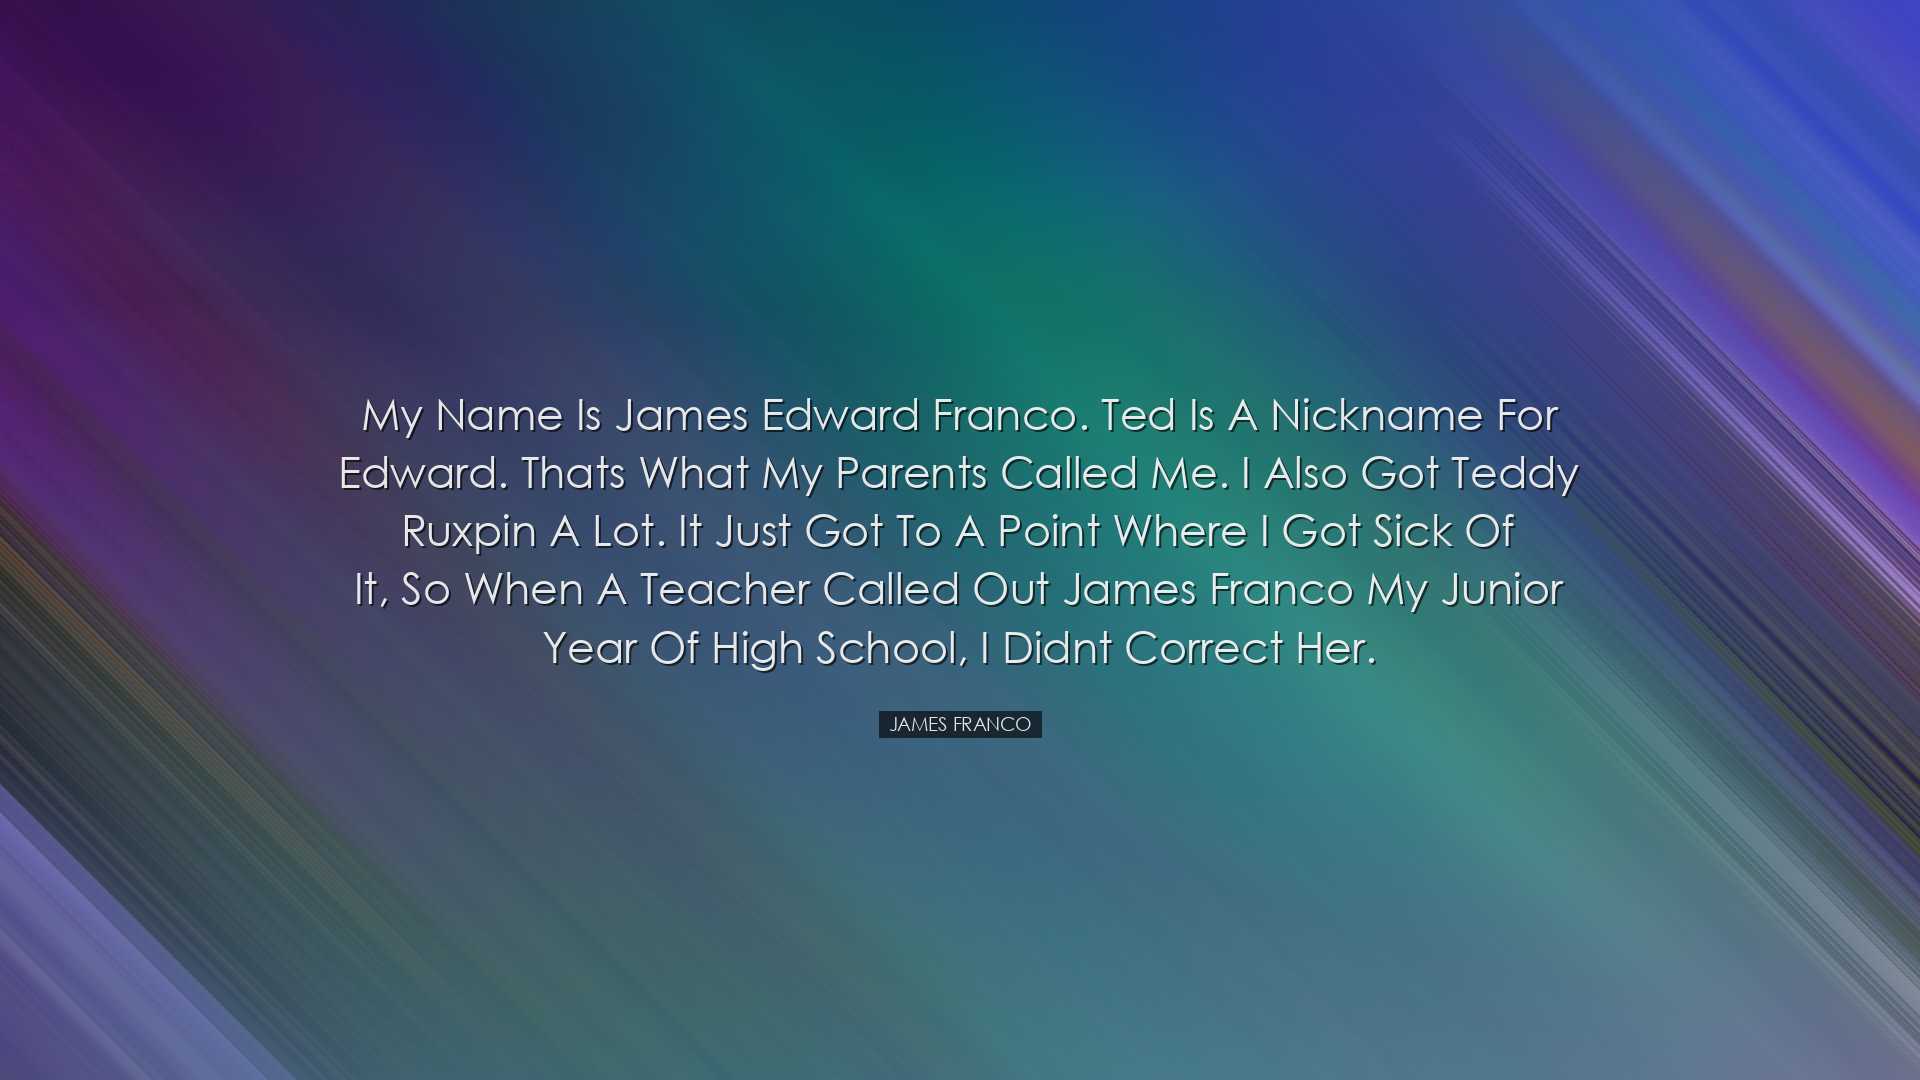 My name is James Edward Franco. Ted is a nickname for Edward. That